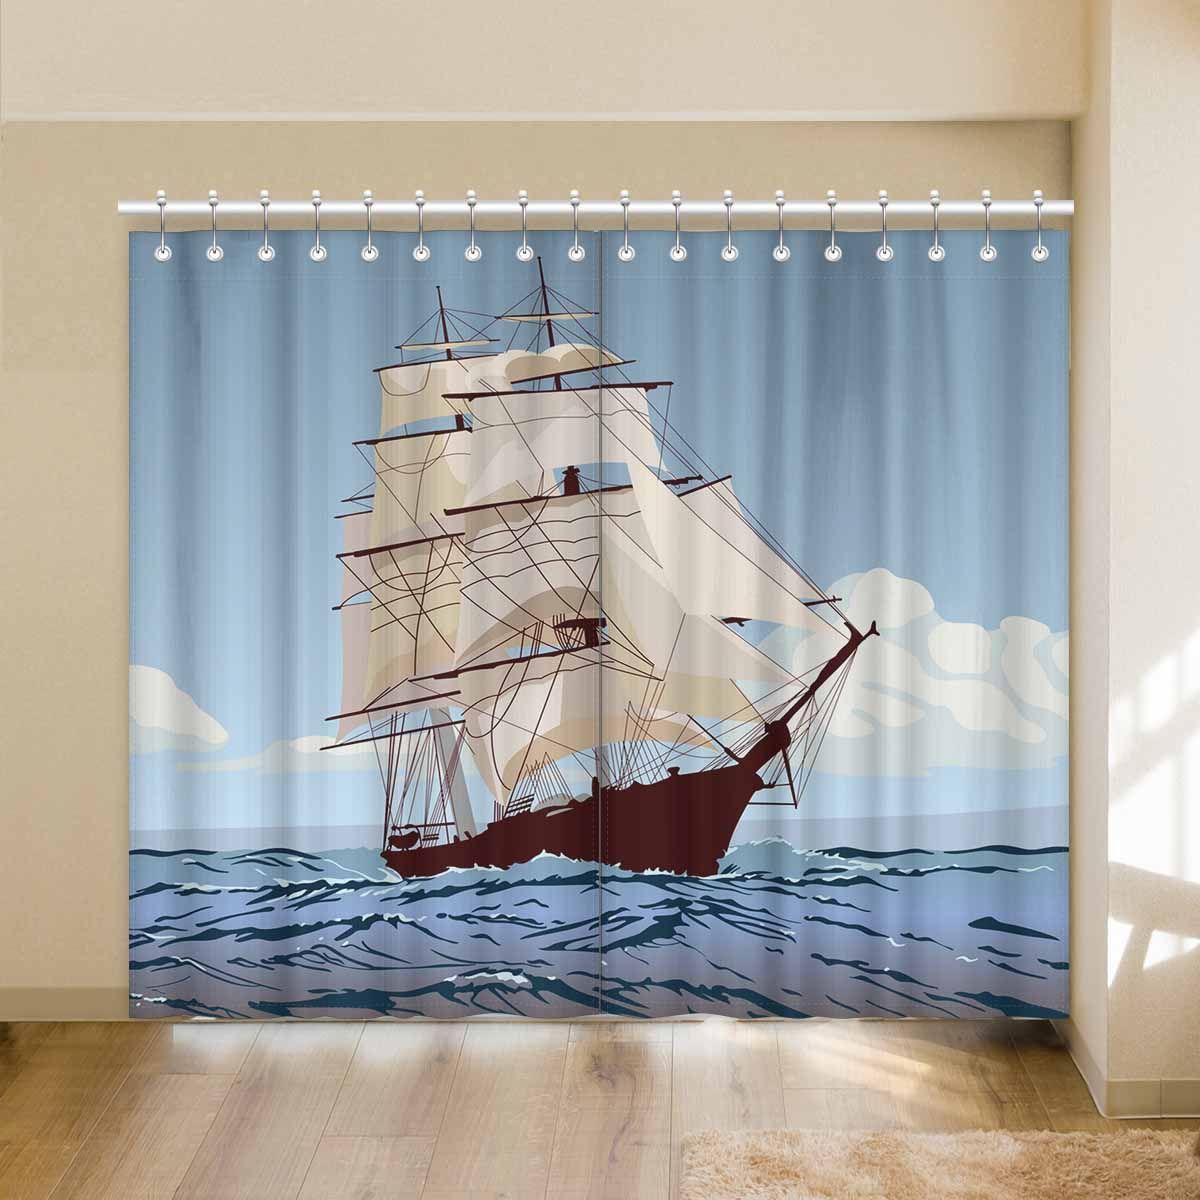 Ship With Sails Running On The Waves Printed Window Curtain